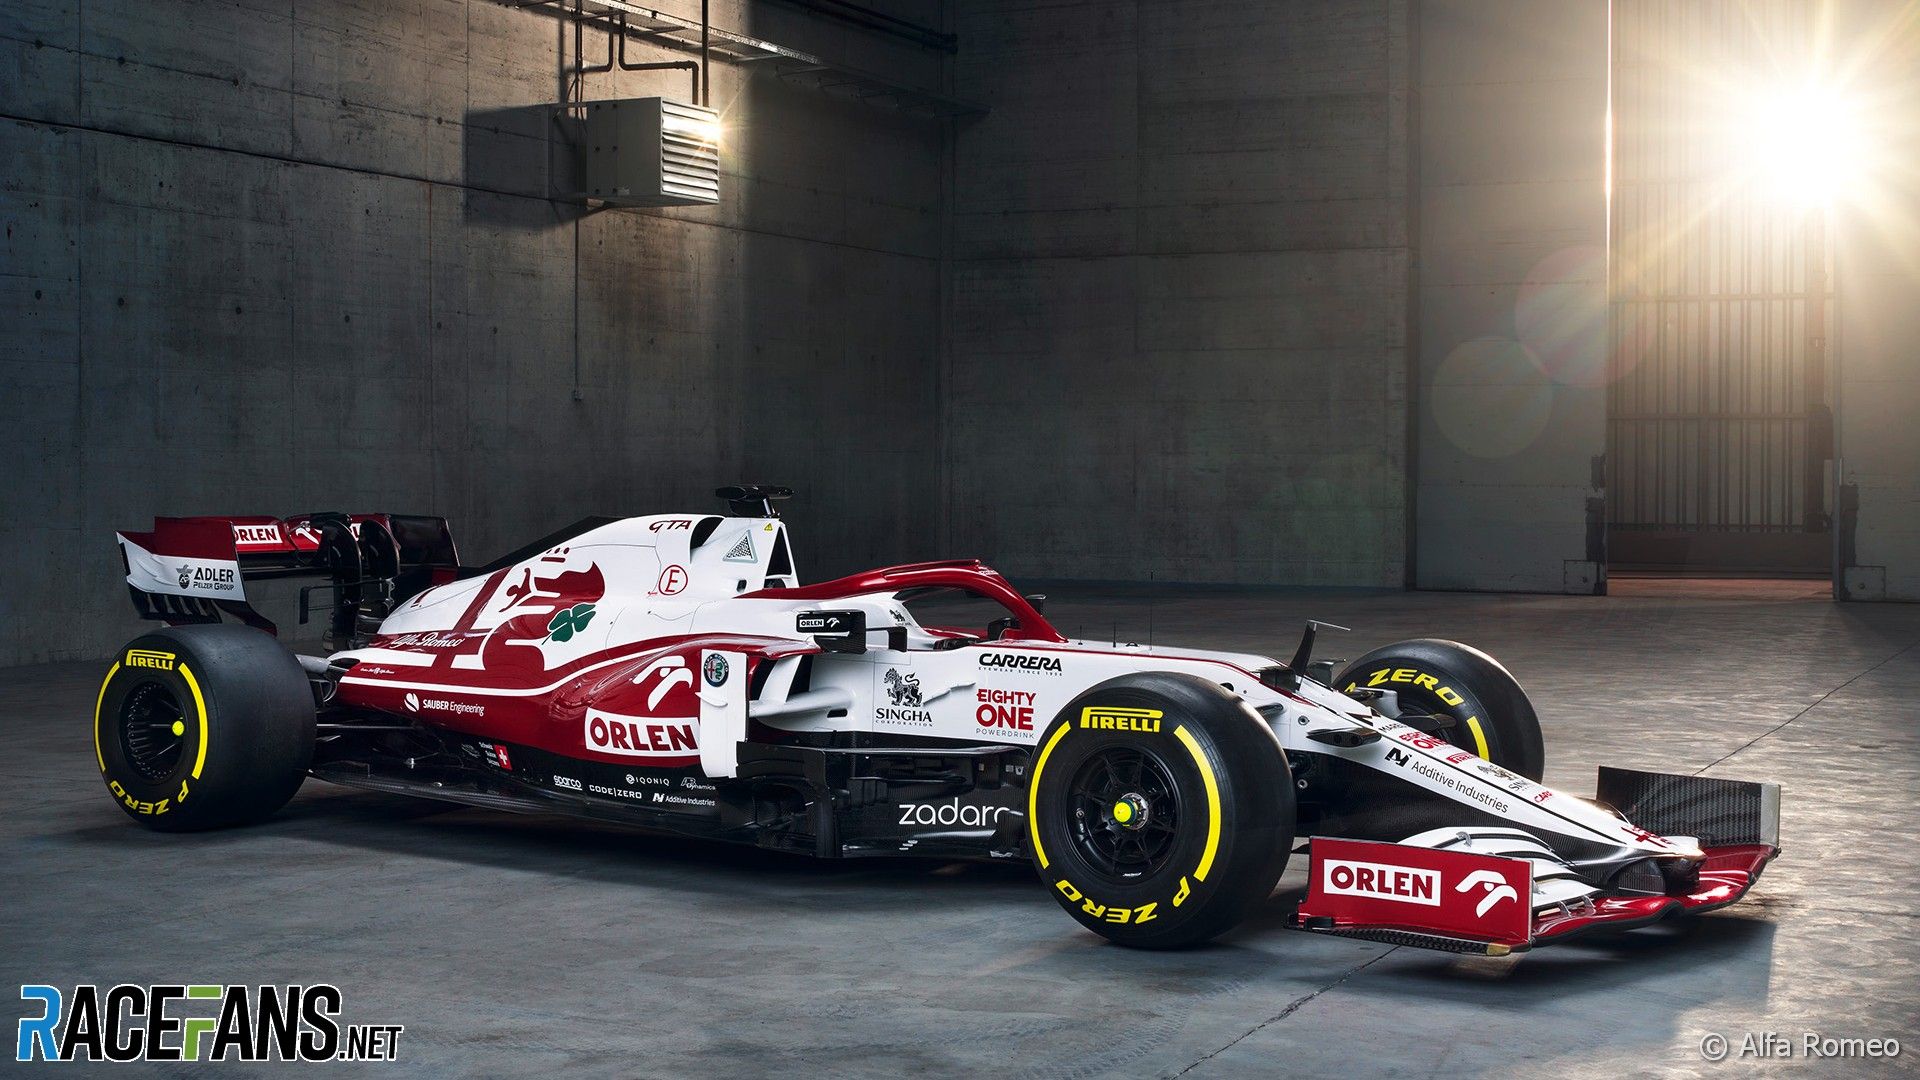 Alfa Romeo focused on complete revolution next year as they launch 2021 car · RaceFans